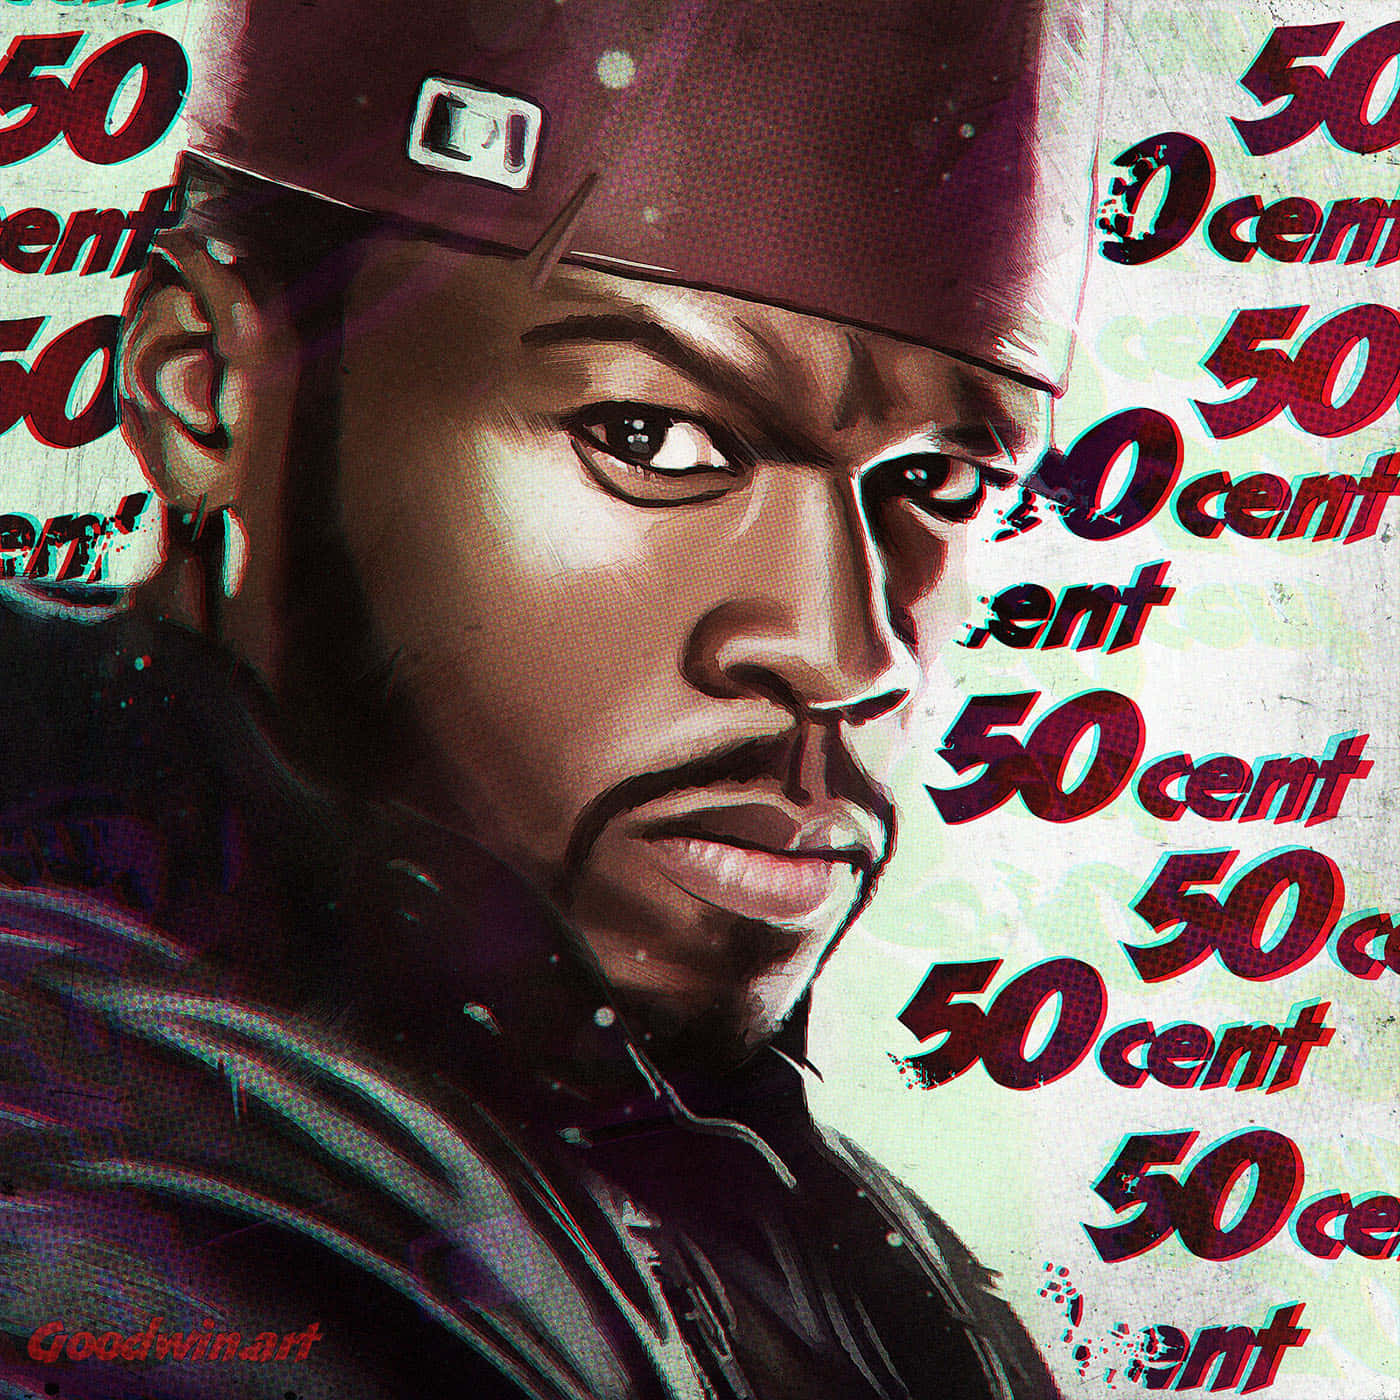 An Iconic Look of 50 Cent - A True Showman.